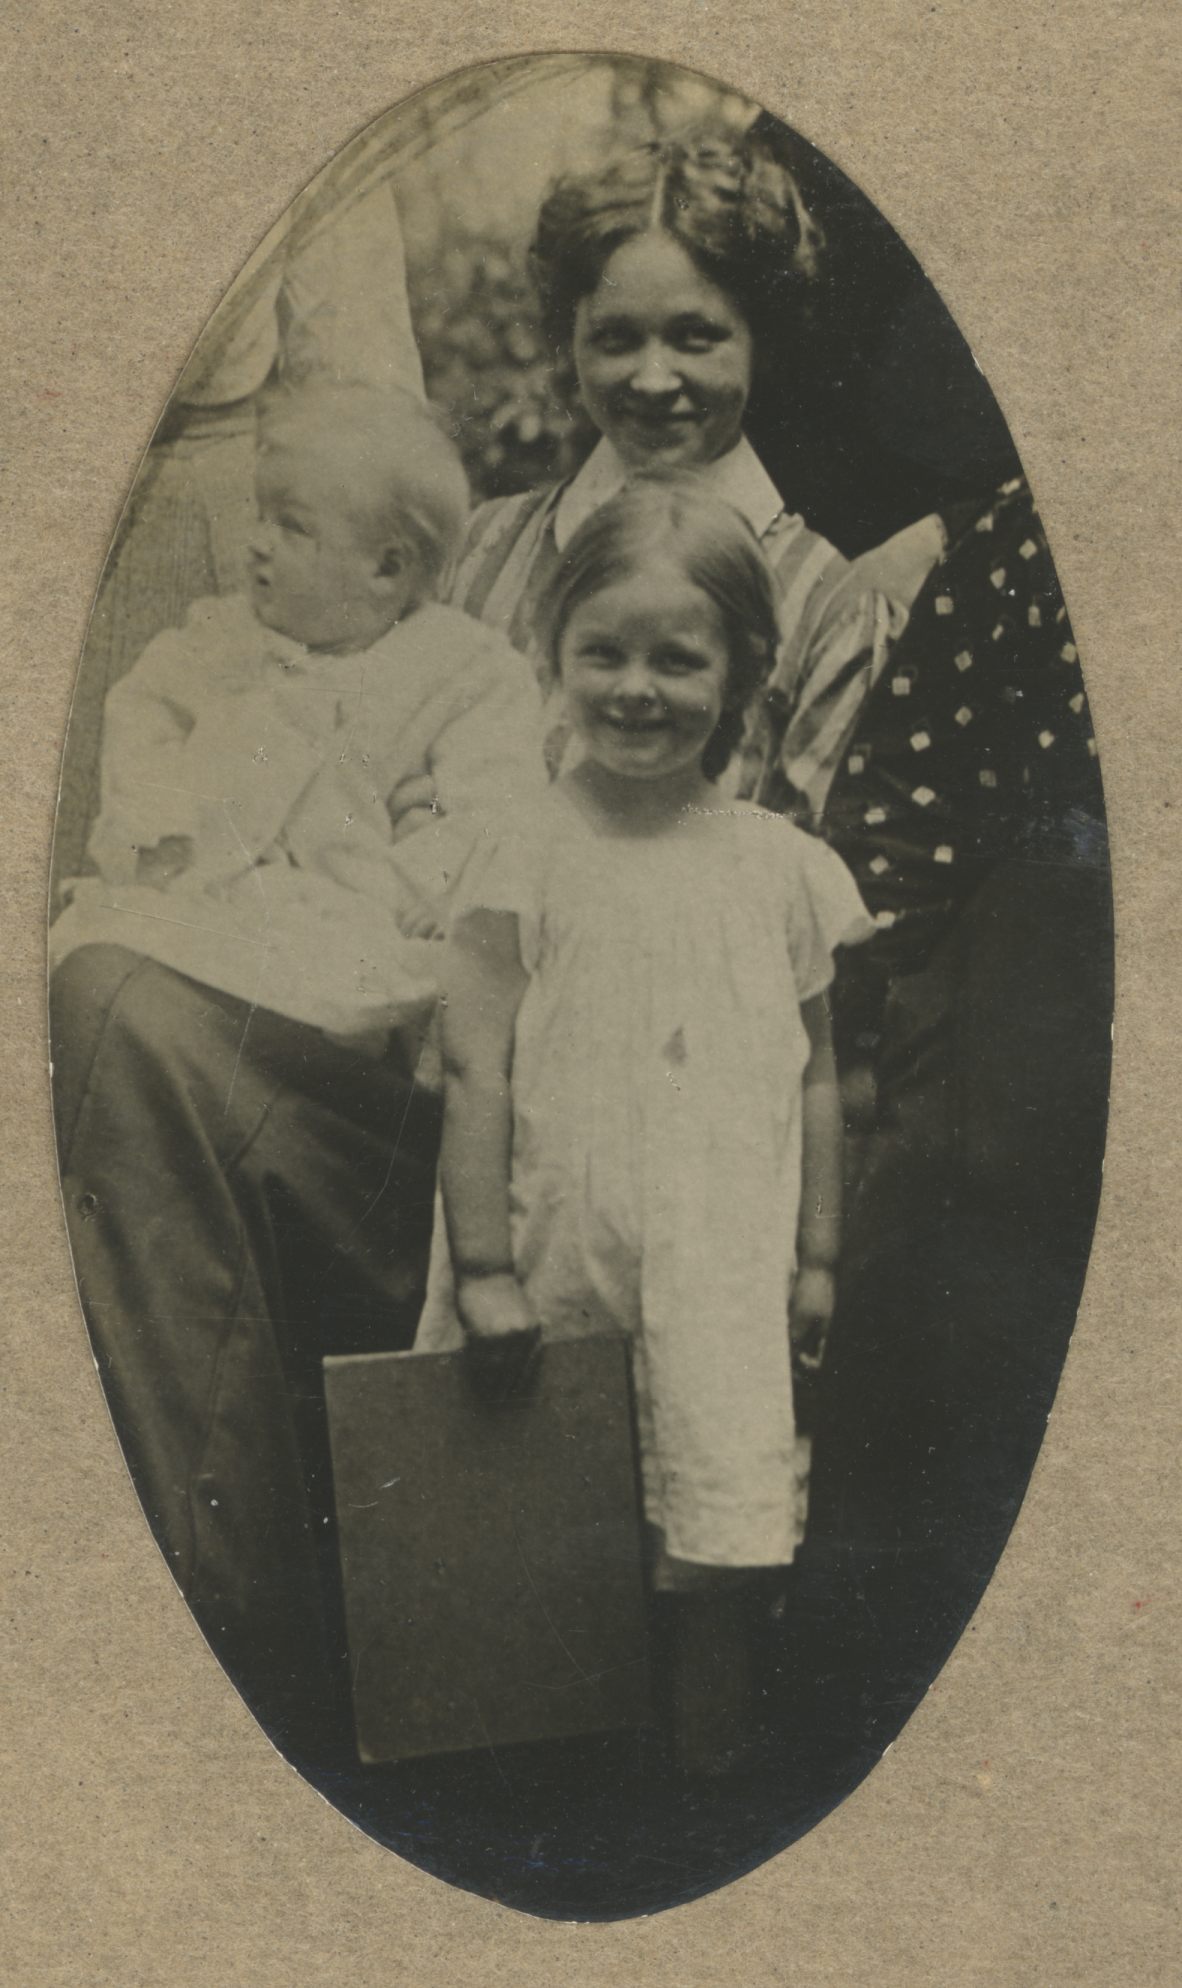 Under, Marie with her small children in 1906 in Kutchino near Moscow